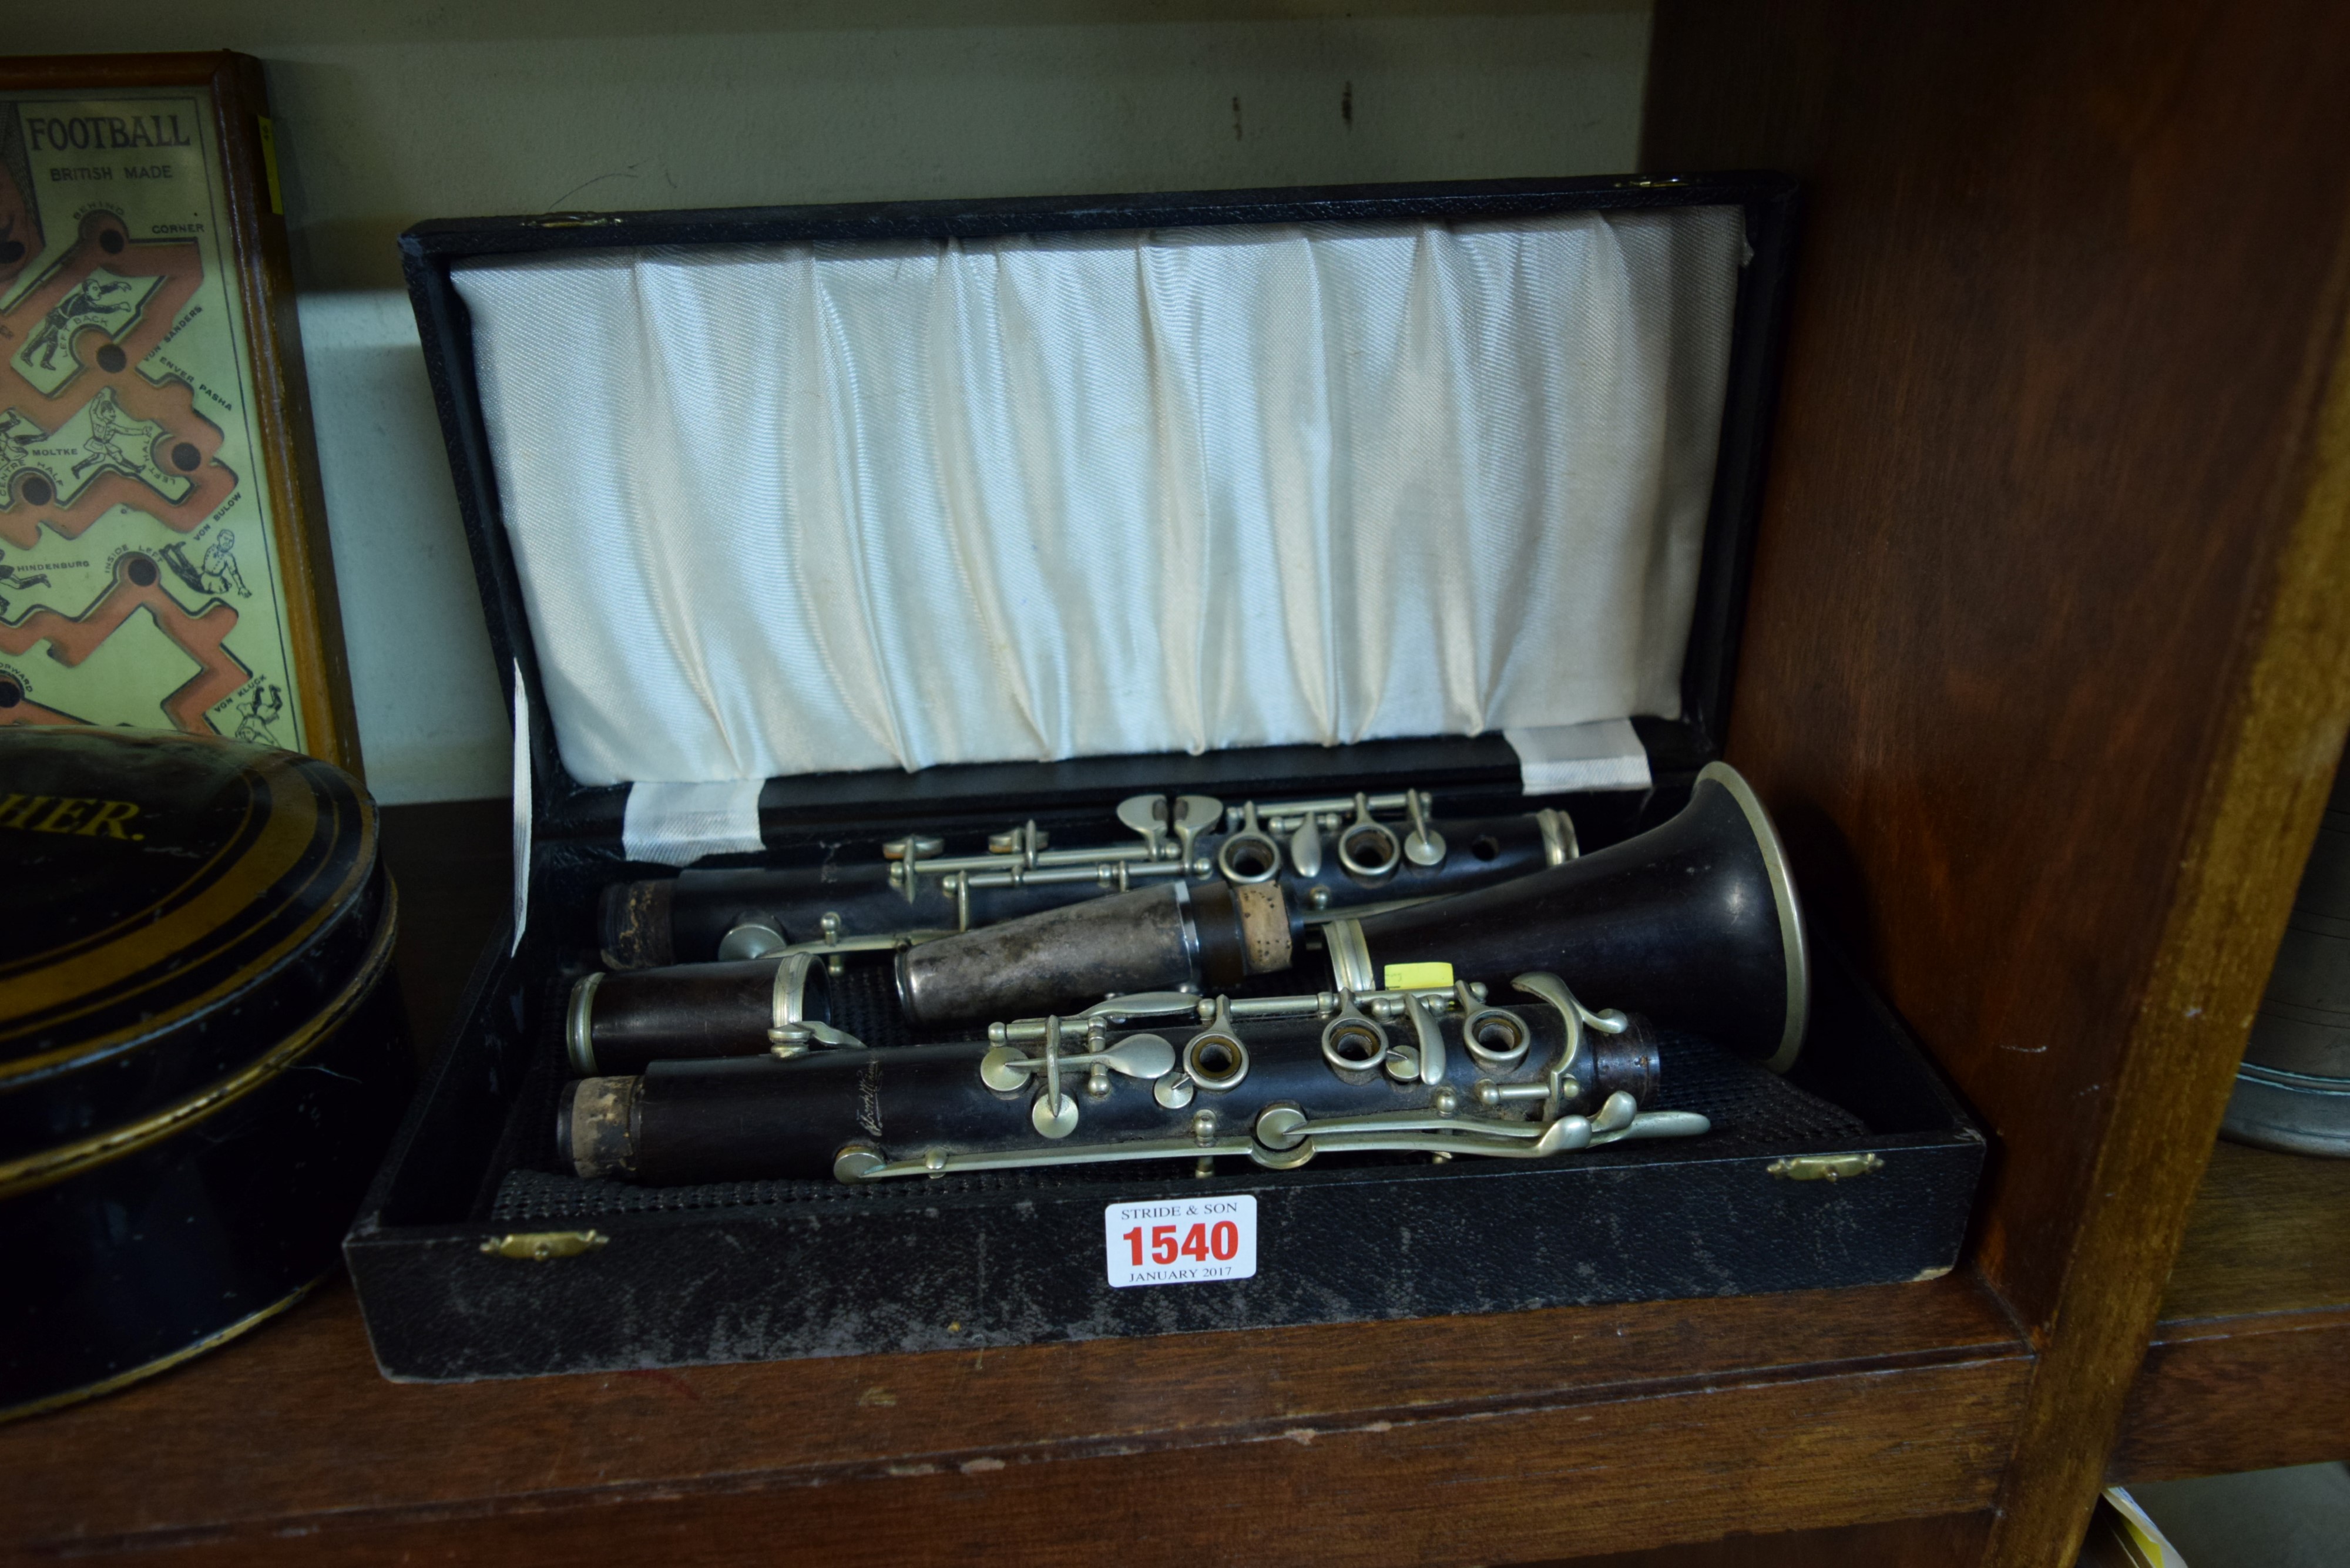 A hardwood and nickel plated clarinet, in box.